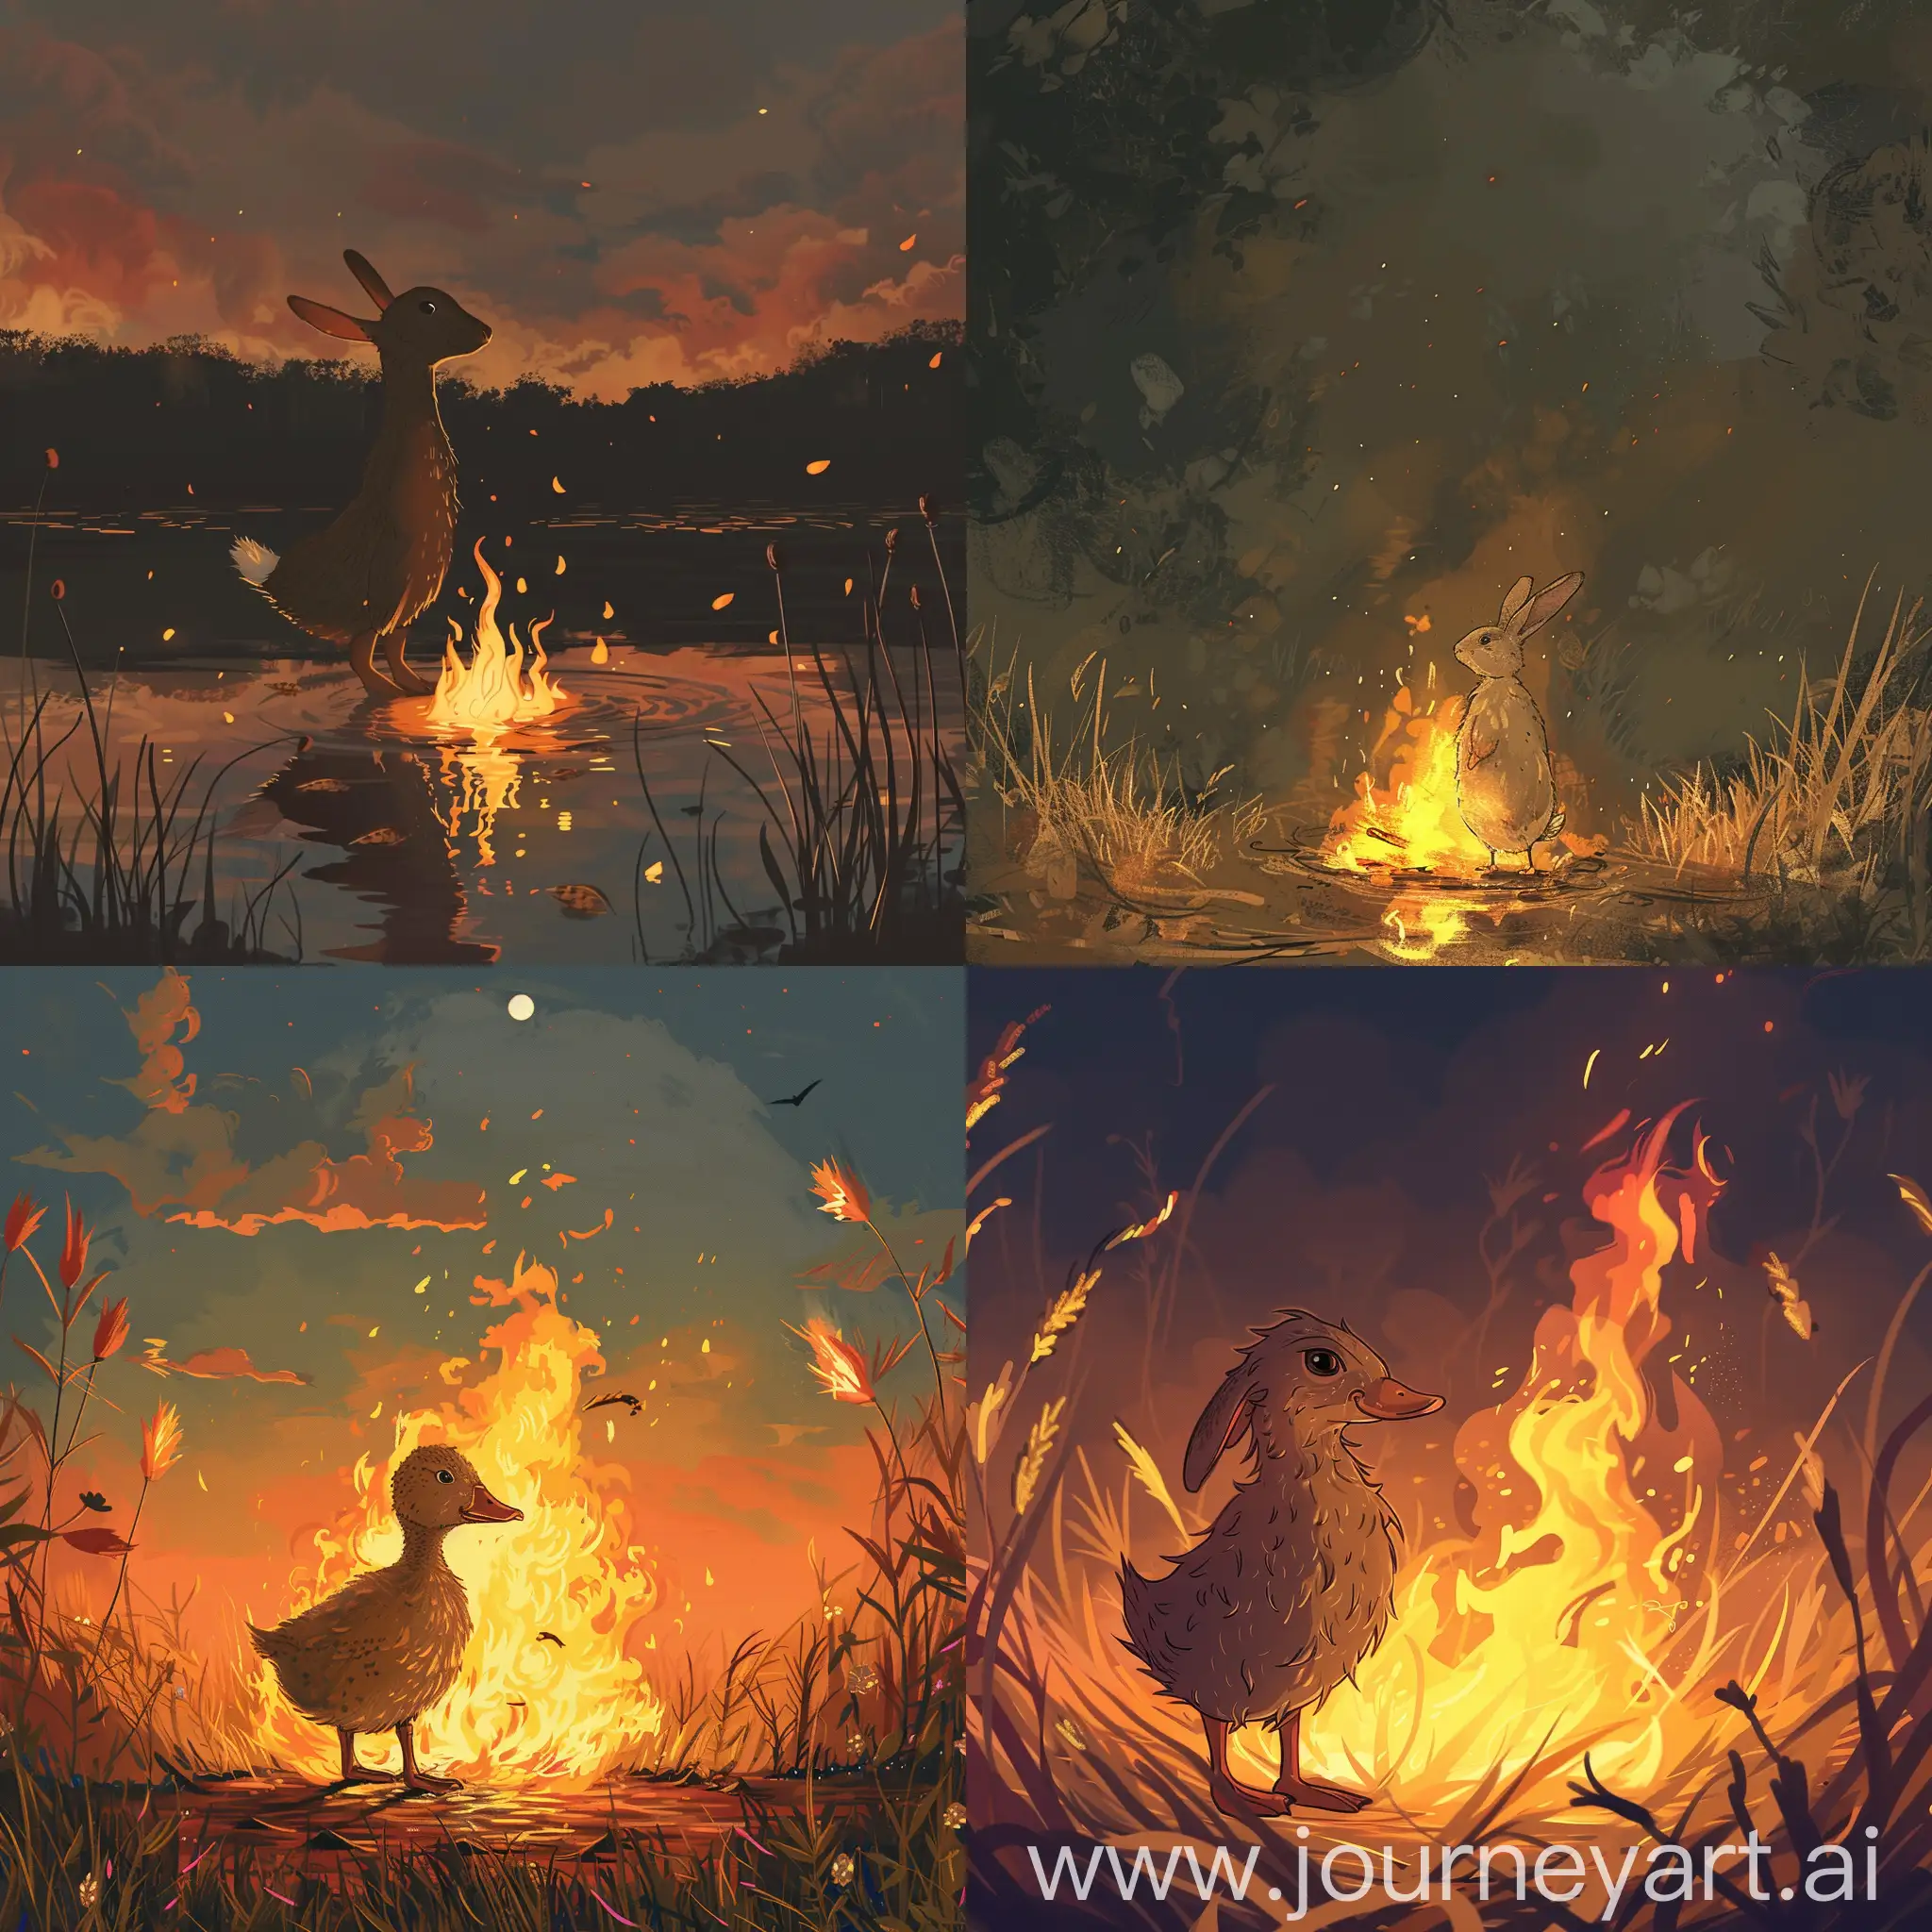 an illustration of a duckrabbit  standing in a fire during the evening in the style of moriz jung